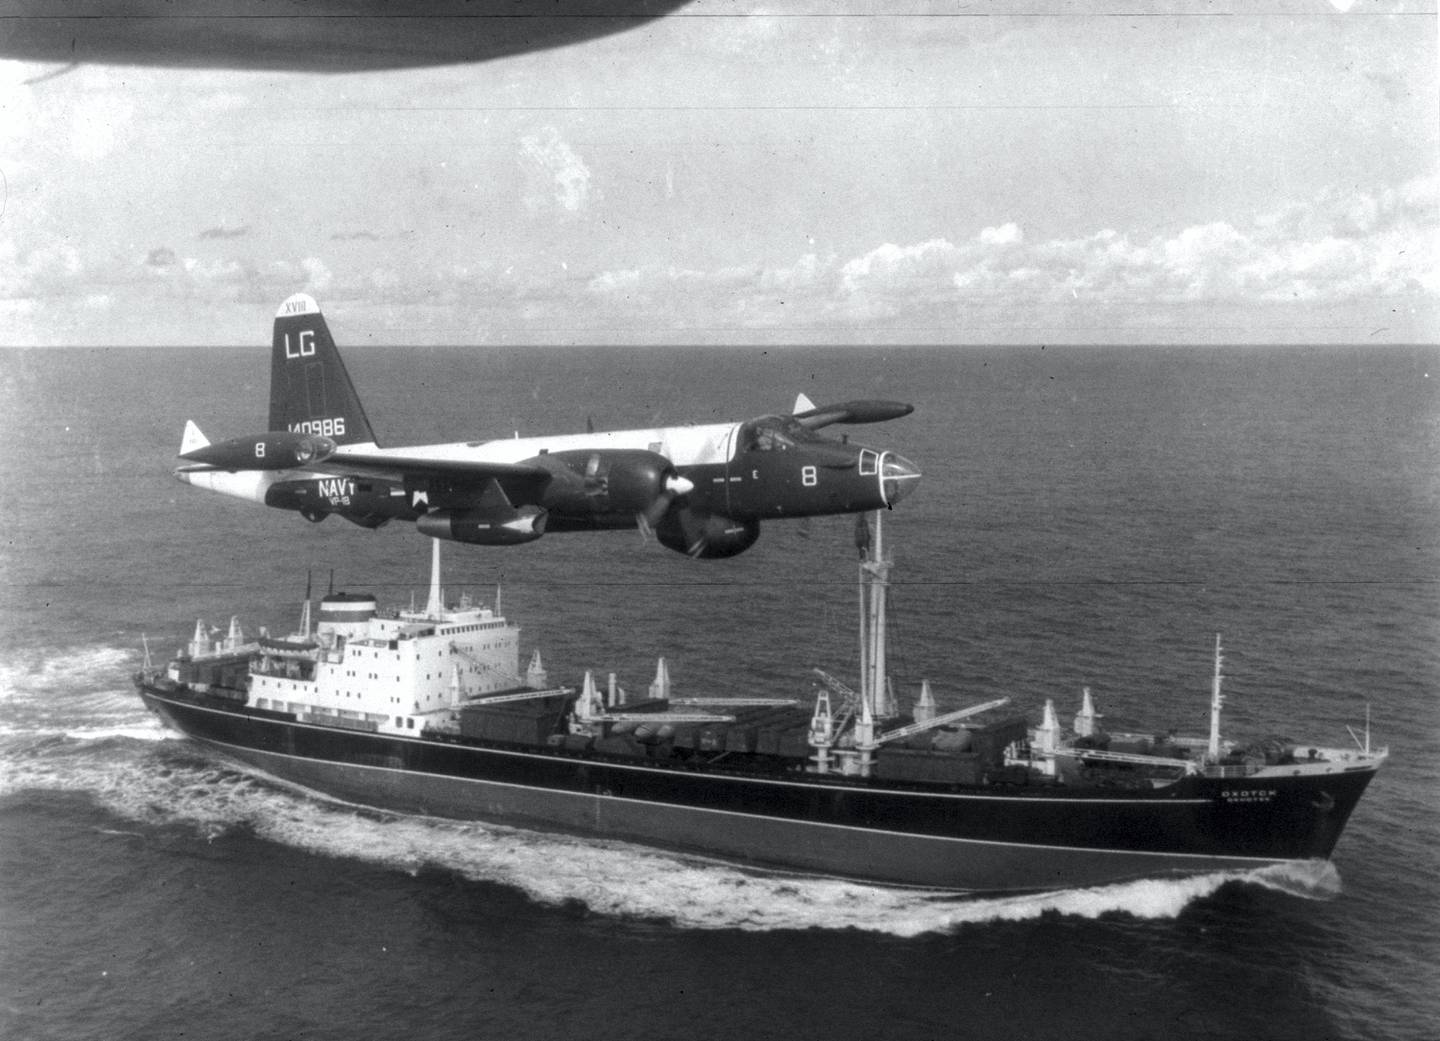 AT SEA:  (EDITORIAL USE ONLY)  (FILE PHOTO)  A P2V Neptune U.S. patrol plane flies over a Soviet freighter during the Cuban missile crisis in this 1962 photograph. Former Russian and U.S. officials attending a conference commemorating the 40th anniversary of the missile crisis October 2002 in Cuba said that the world was closer to a nuclear conflict during the 1962 standoff between Cuba and the U.S., than governments were aware of.  (Photo by Getty Images)